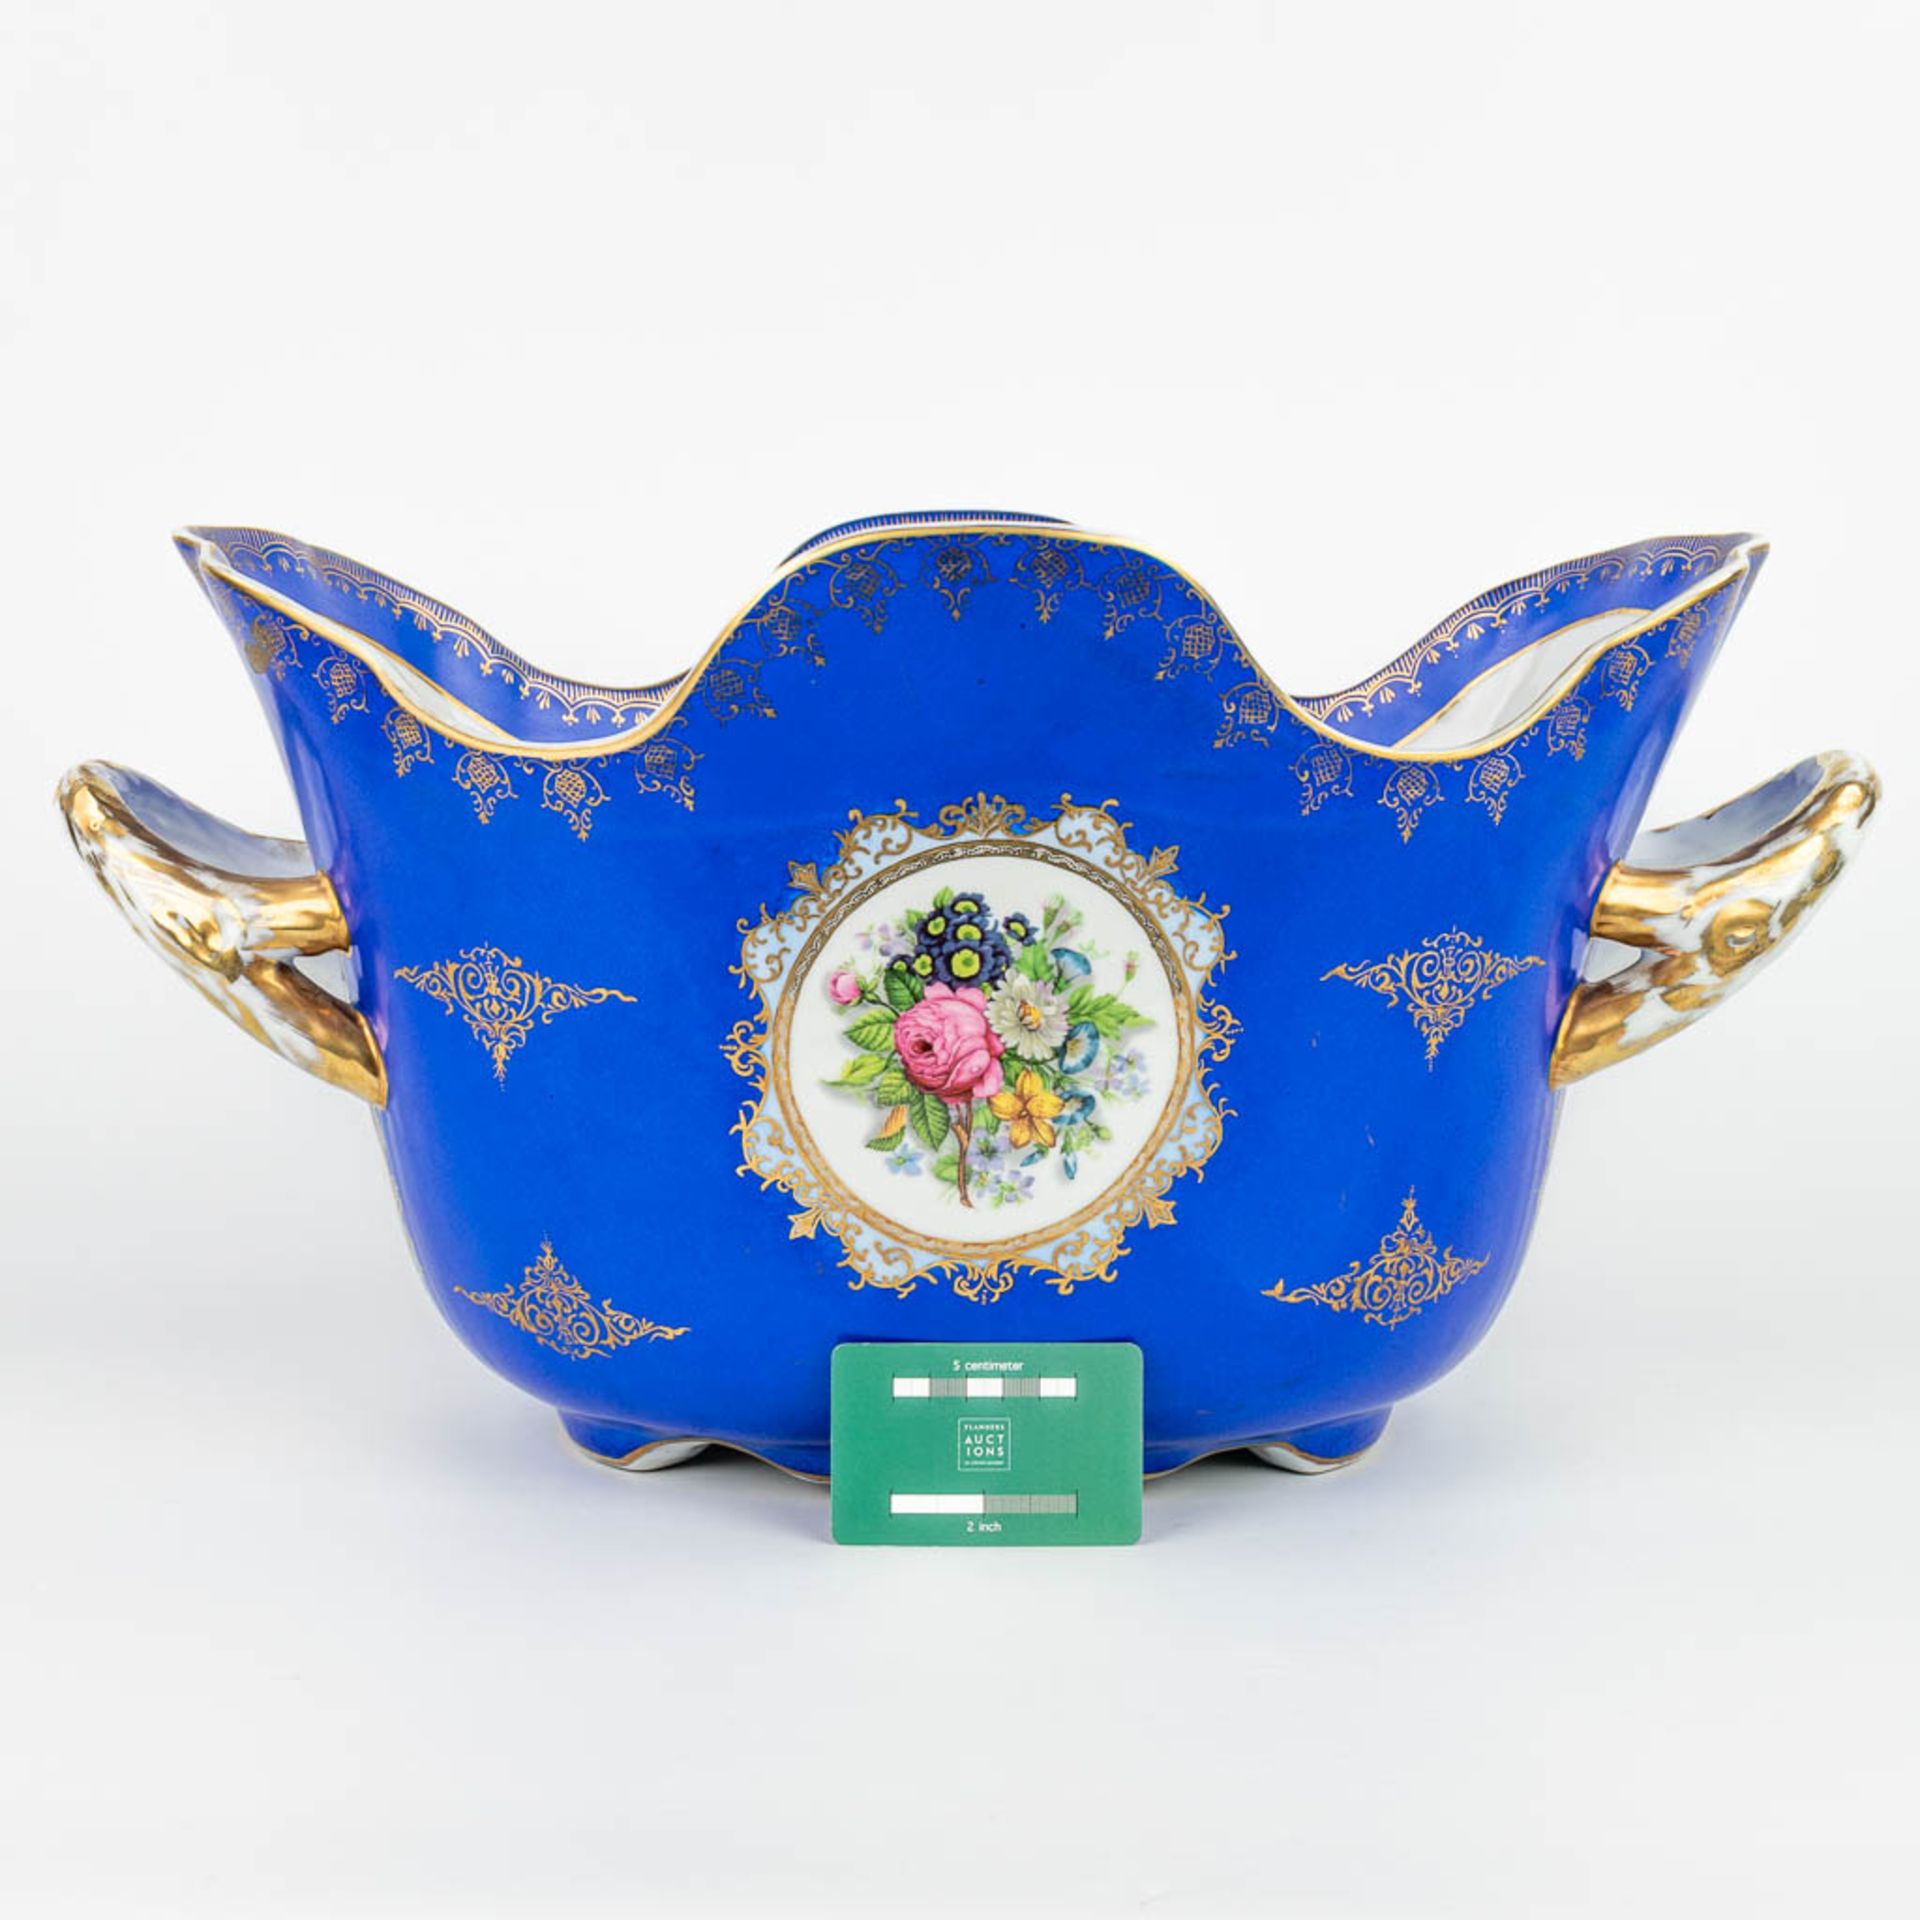 A large wine cooler made of porcelain with flower decor and marked with the Meissener logo. (H:28cm) - Image 2 of 13